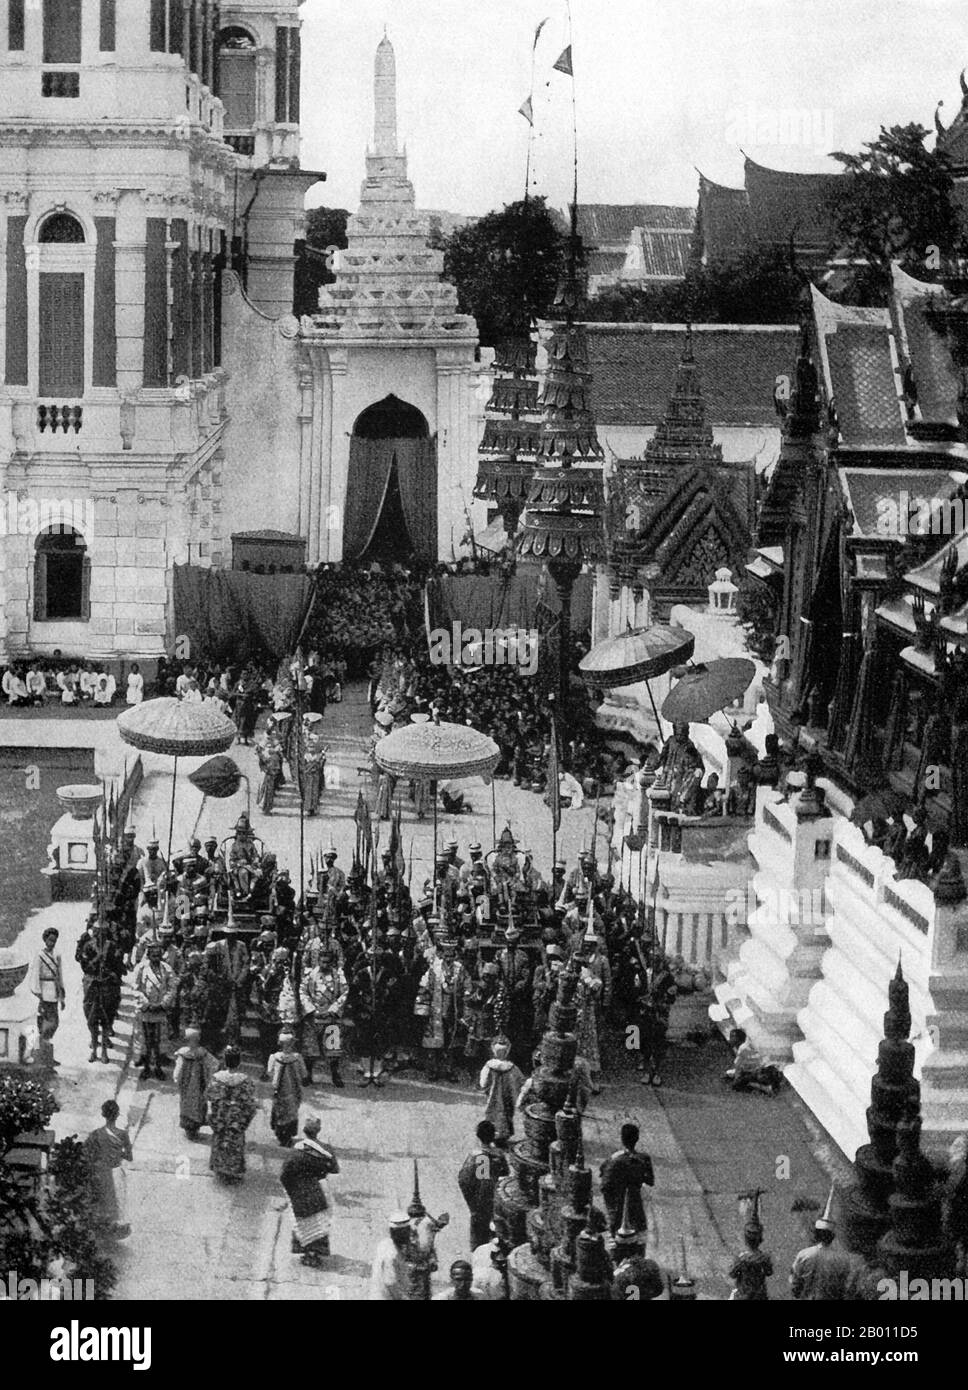 Thailand: Two young princes (bottom left of picture) stand in front of a royal entourage for their tonsure ceremony, Bangkok, late 19th century.  In 19th-century Siam, almost every young male in the royal family entered the ‘sangha’ or Buddhist monkhood as a rite of passage. The tonsure ceremony was an initial act of this rite as all novices must have their heads shaved to enter the monastic order. The tradition survives to this day, not just among Thai royalty, but at all levels of society. Stock Photo